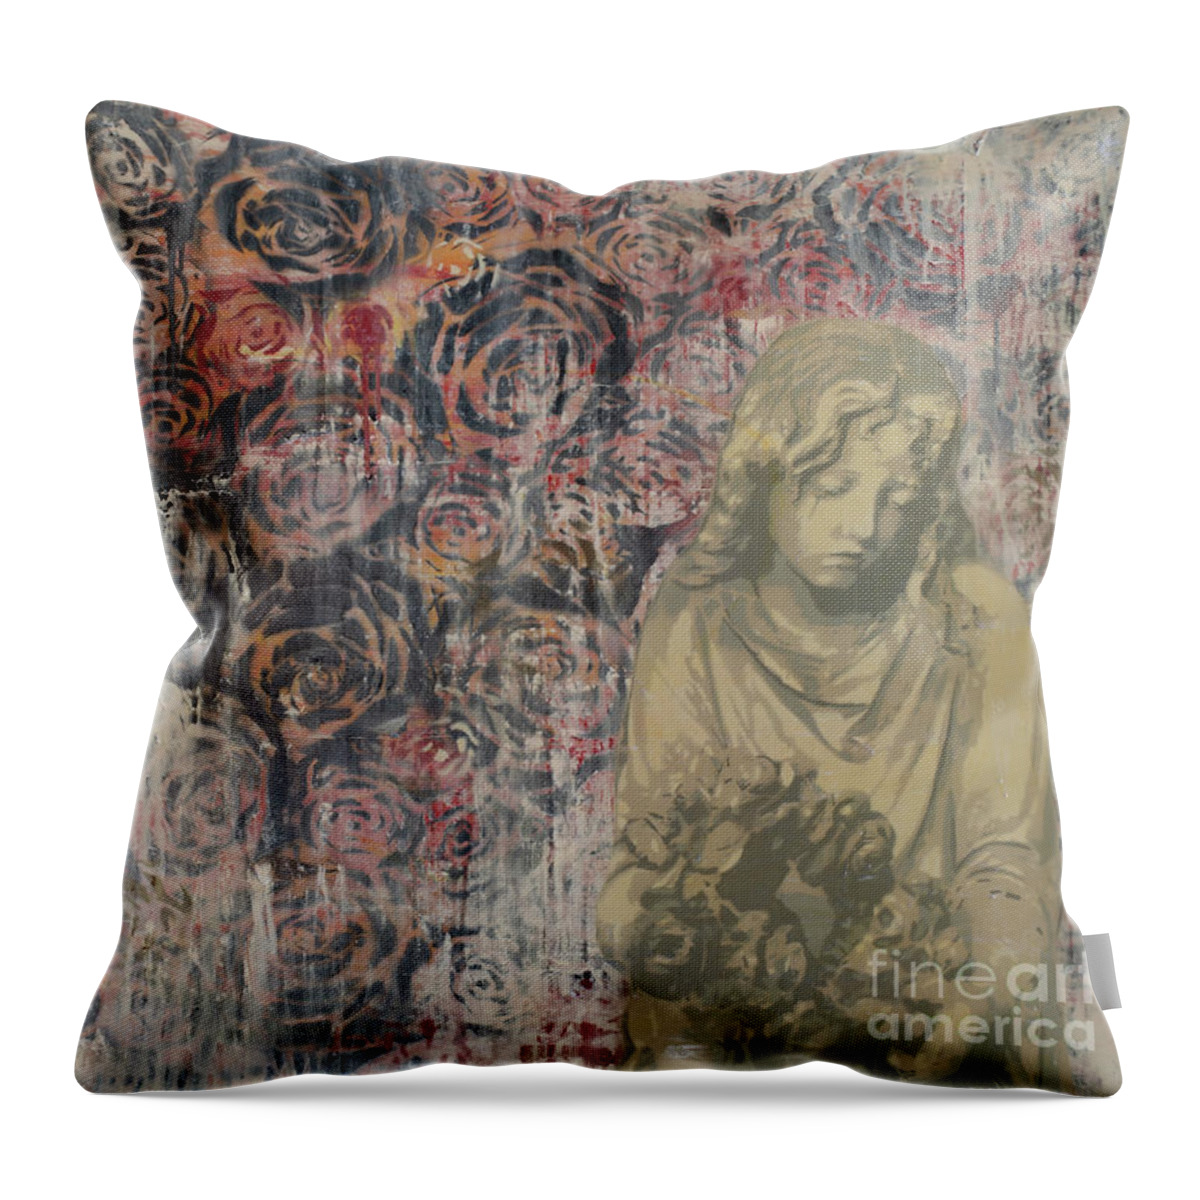  Throw Pillow featuring the mixed media Flower Girl by SORROW Gallery